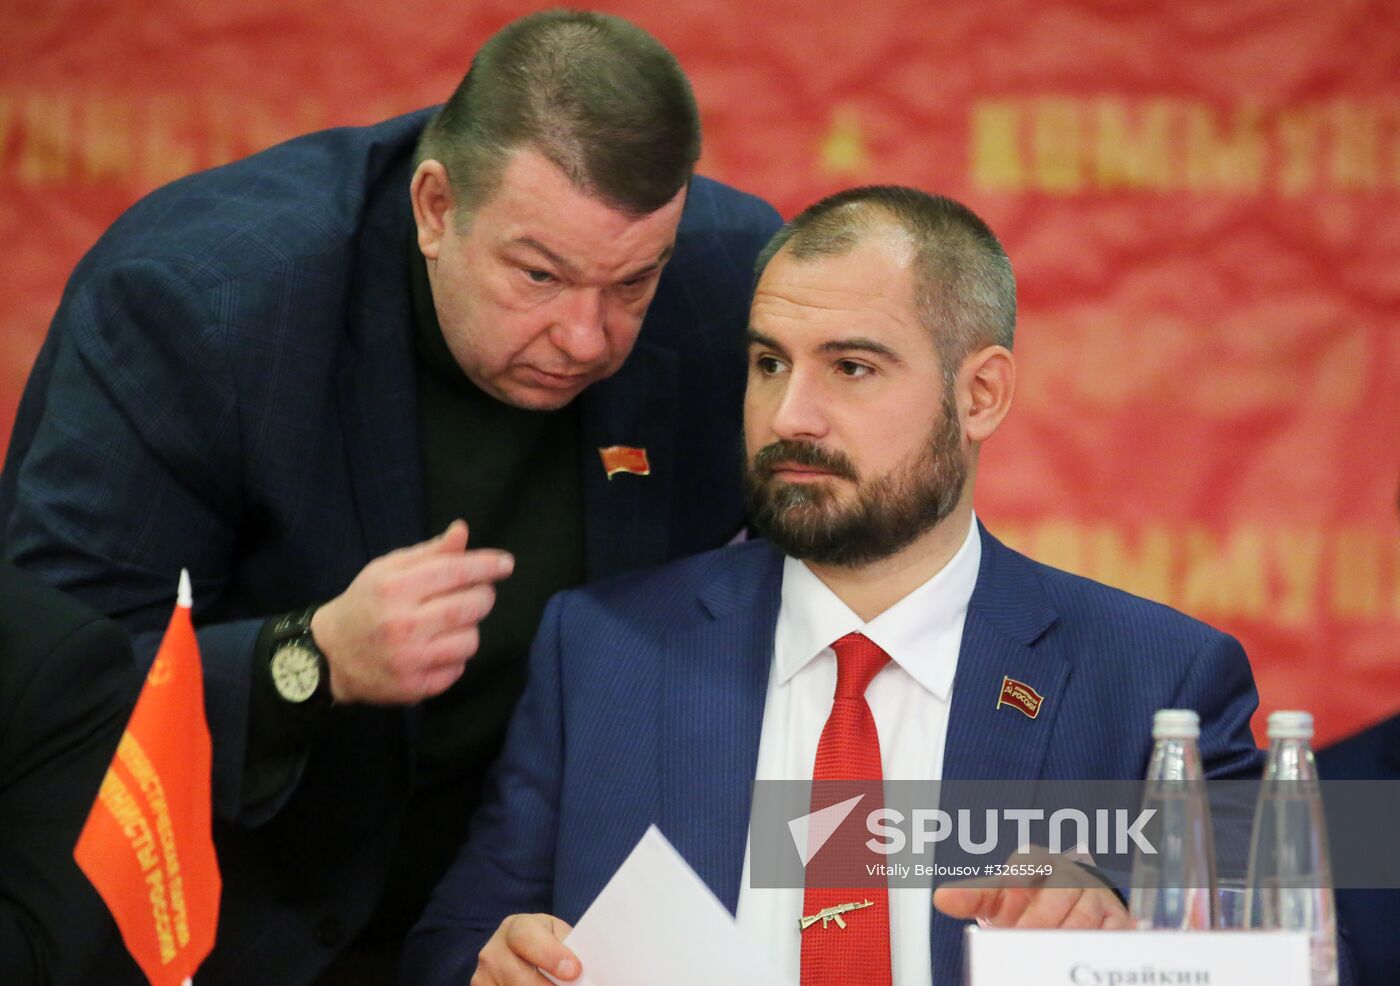 Communists of Russia party holds convention